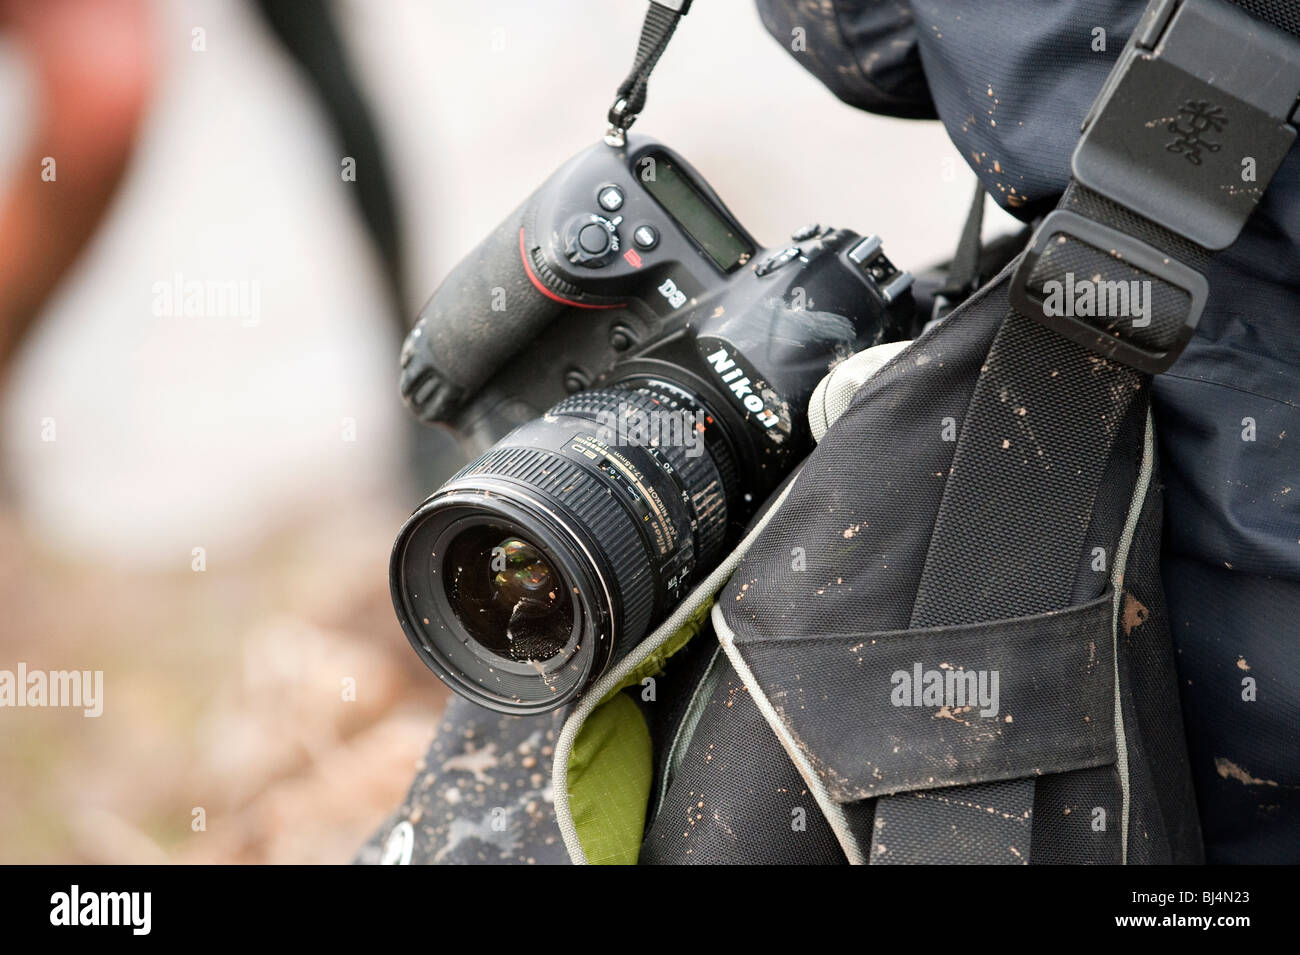 photographer with mud all over multiple cameras at sporting event Stock Photo